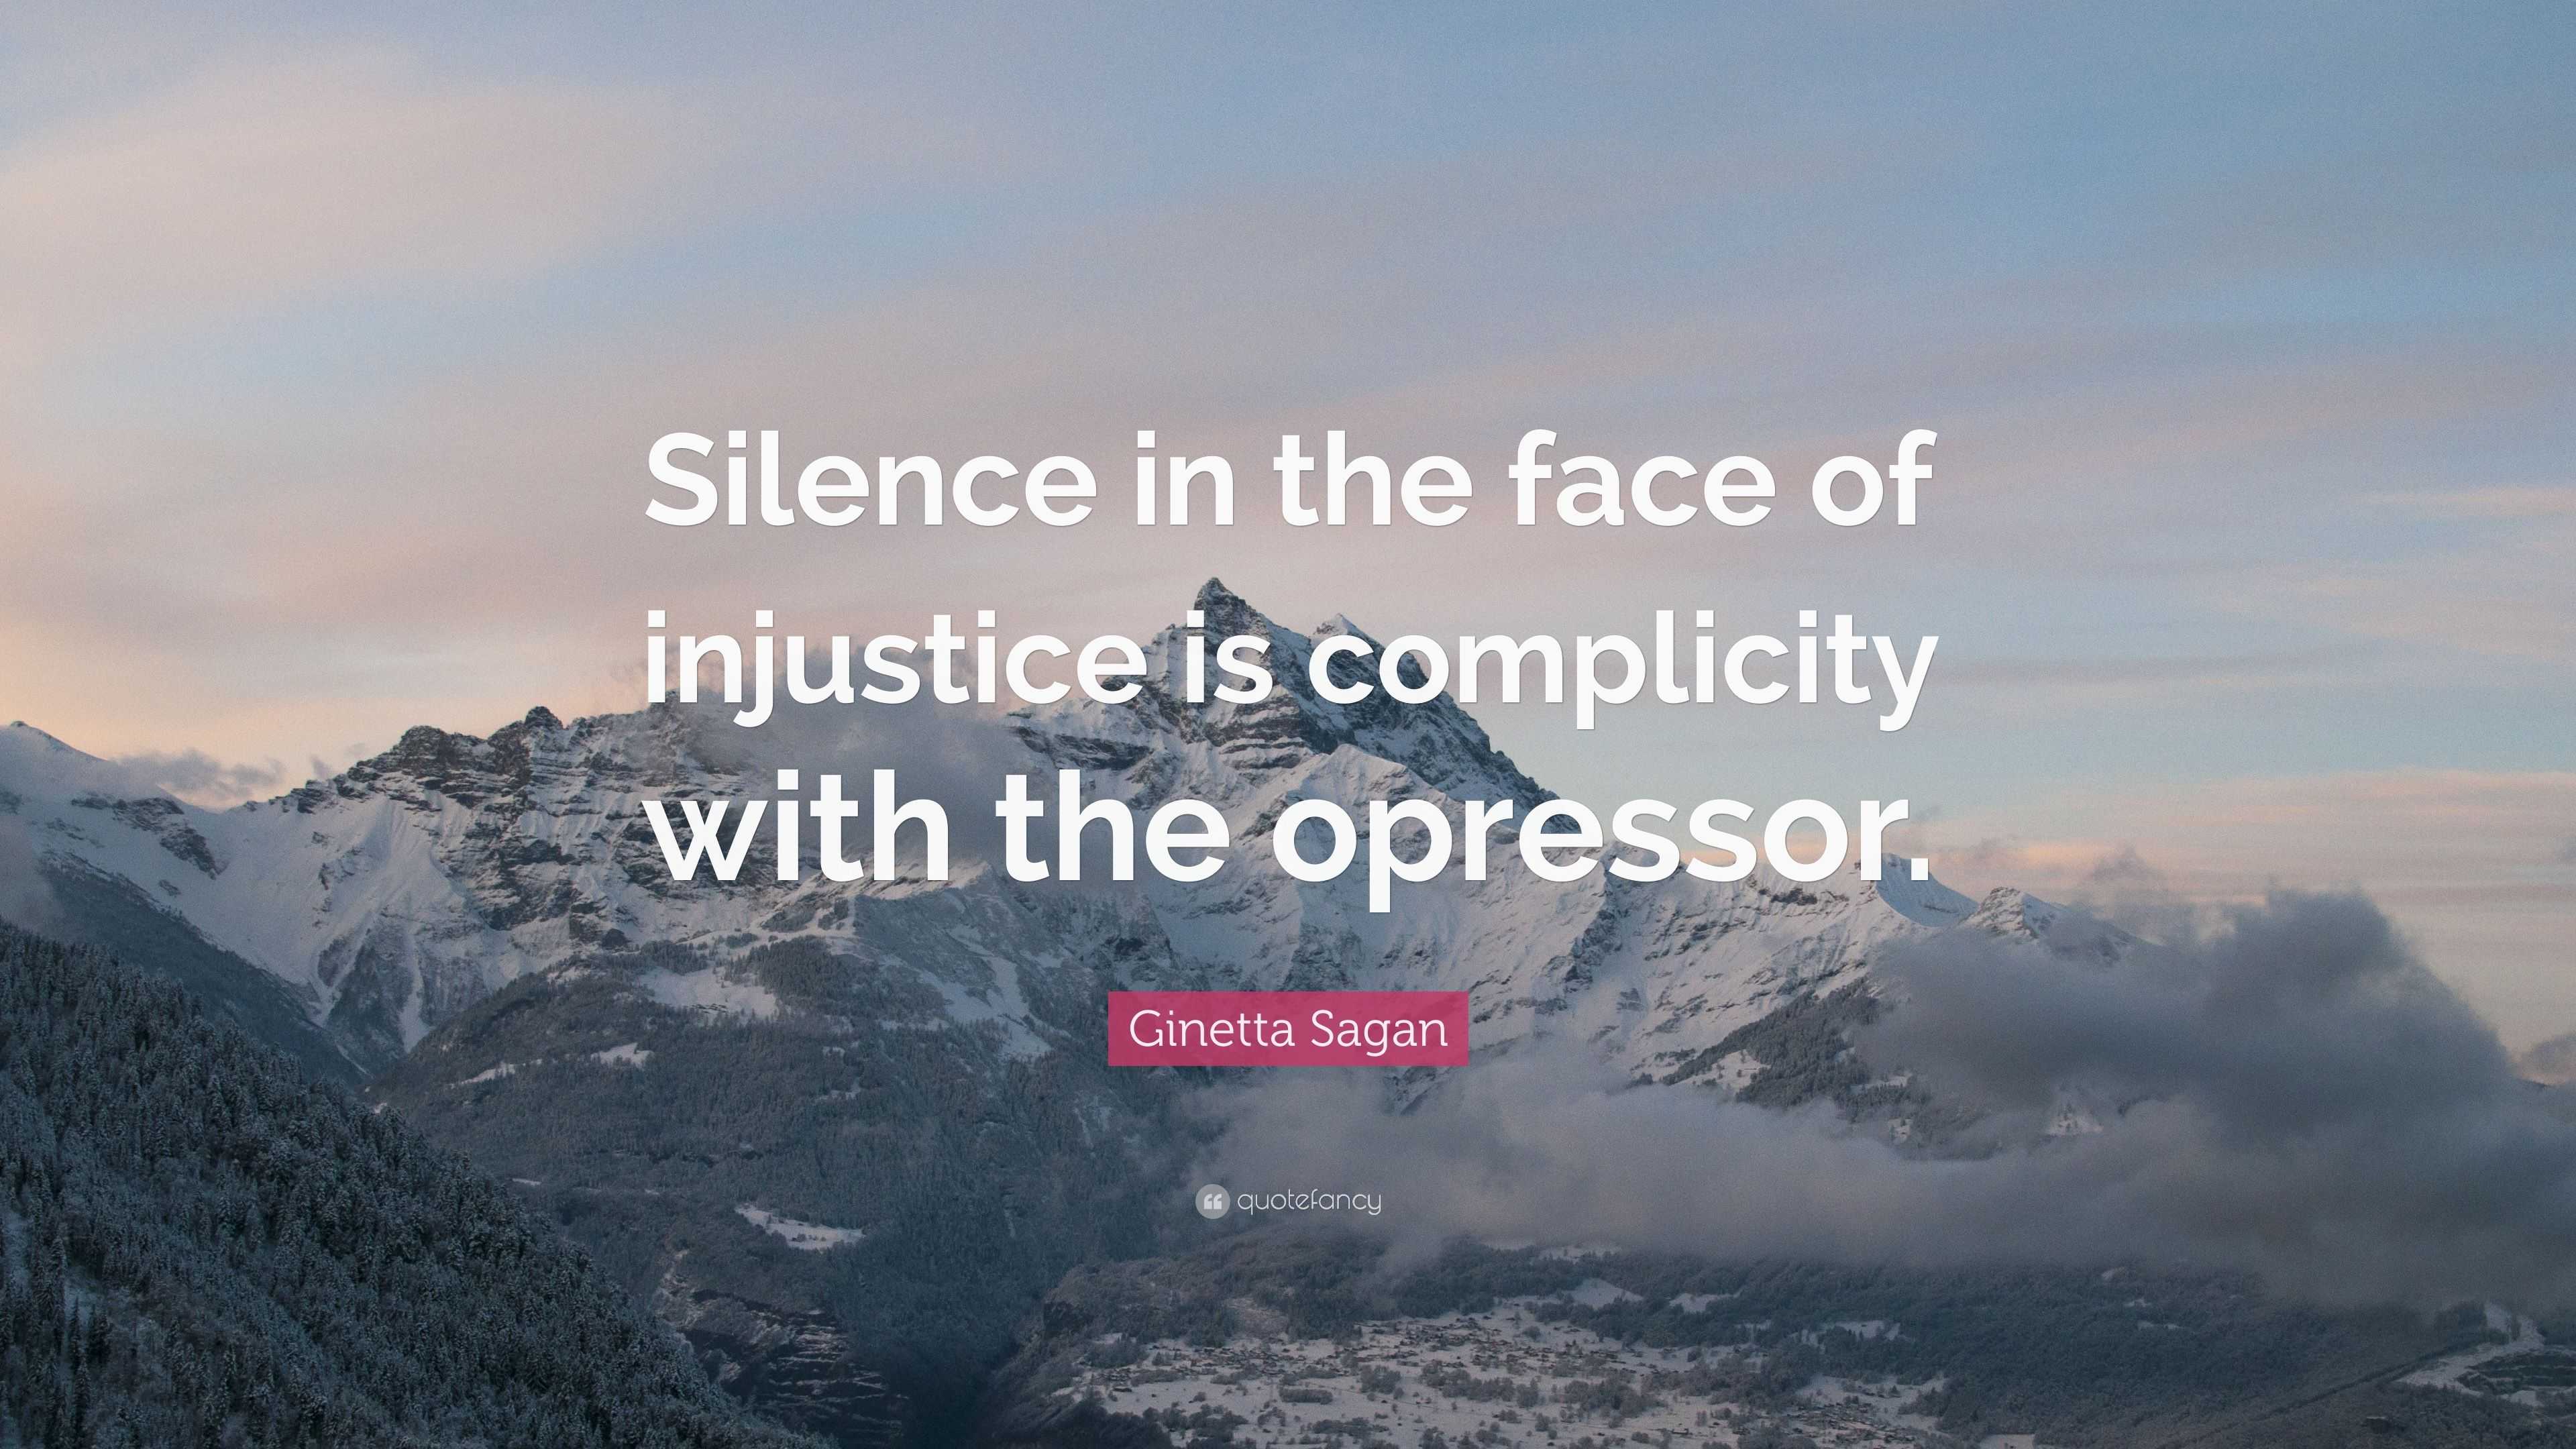 Ginetta Sagan Quote: “Silence in the face of injustice is complicity ...